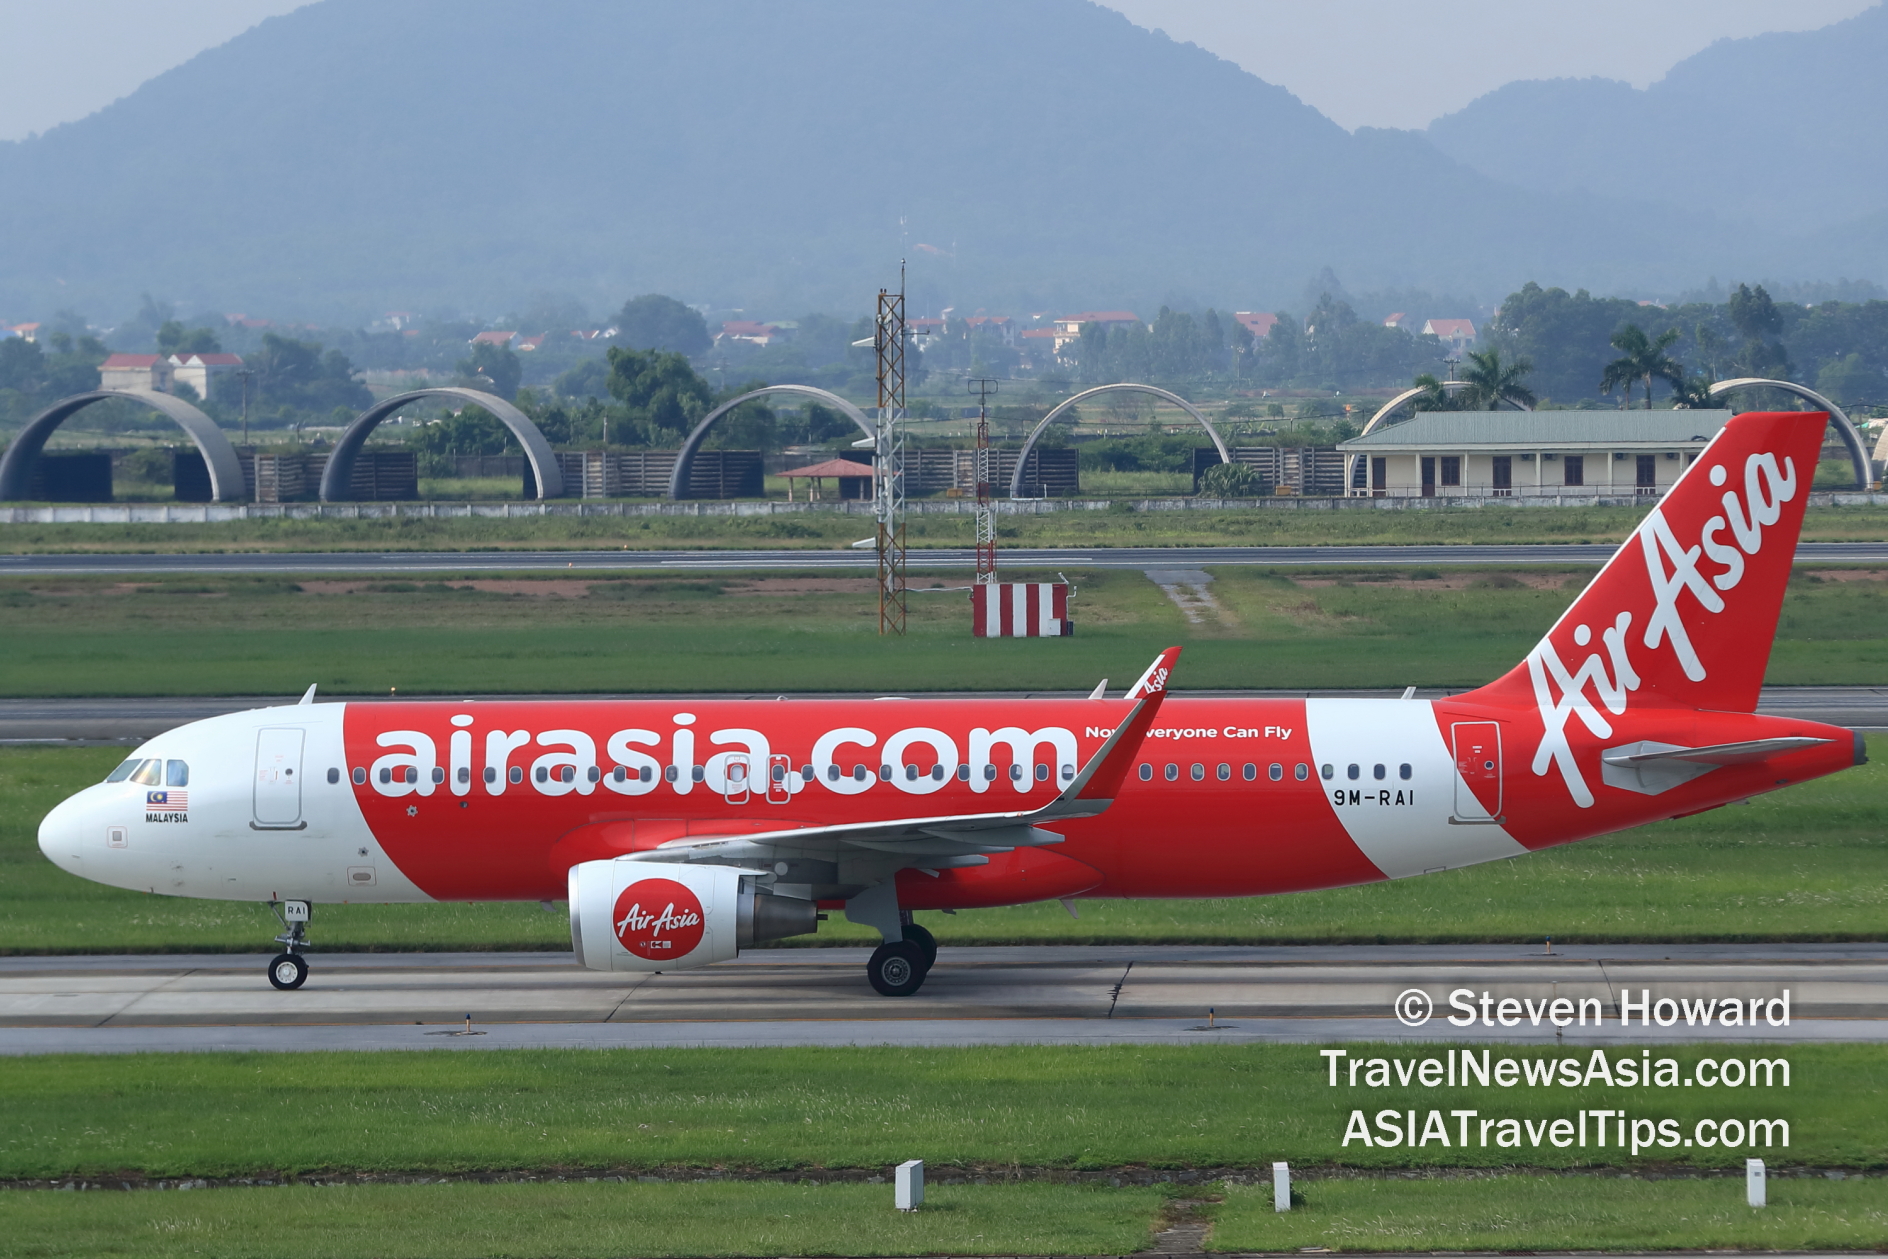 AirAsia Malaysia A320 reg: 9M-RAI. Picture by Steven Howard of TravelNewsAsia.com Click to enlarge.